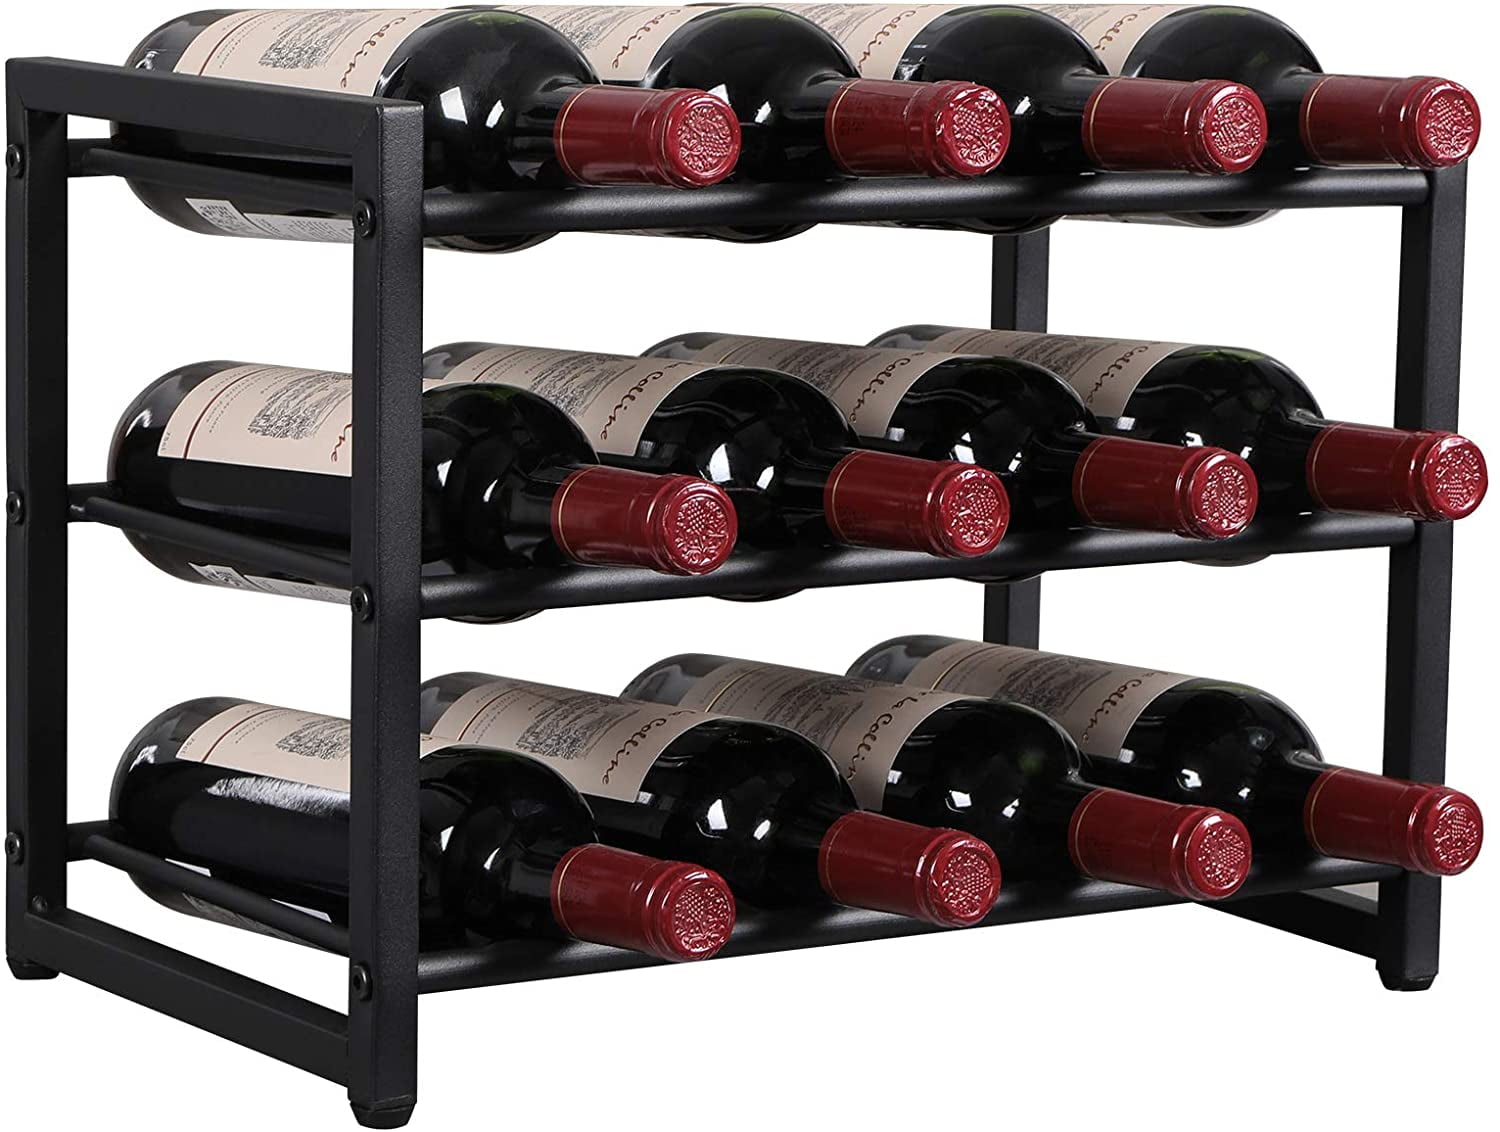 OROPY 12 Bottle Metal Wine Rack Free Standing/Wall Mounted Wine Storage Holder Black 3-Tier Industrial Style Vintage Home Decorations for Cabinet/Cupboard/Countertop 